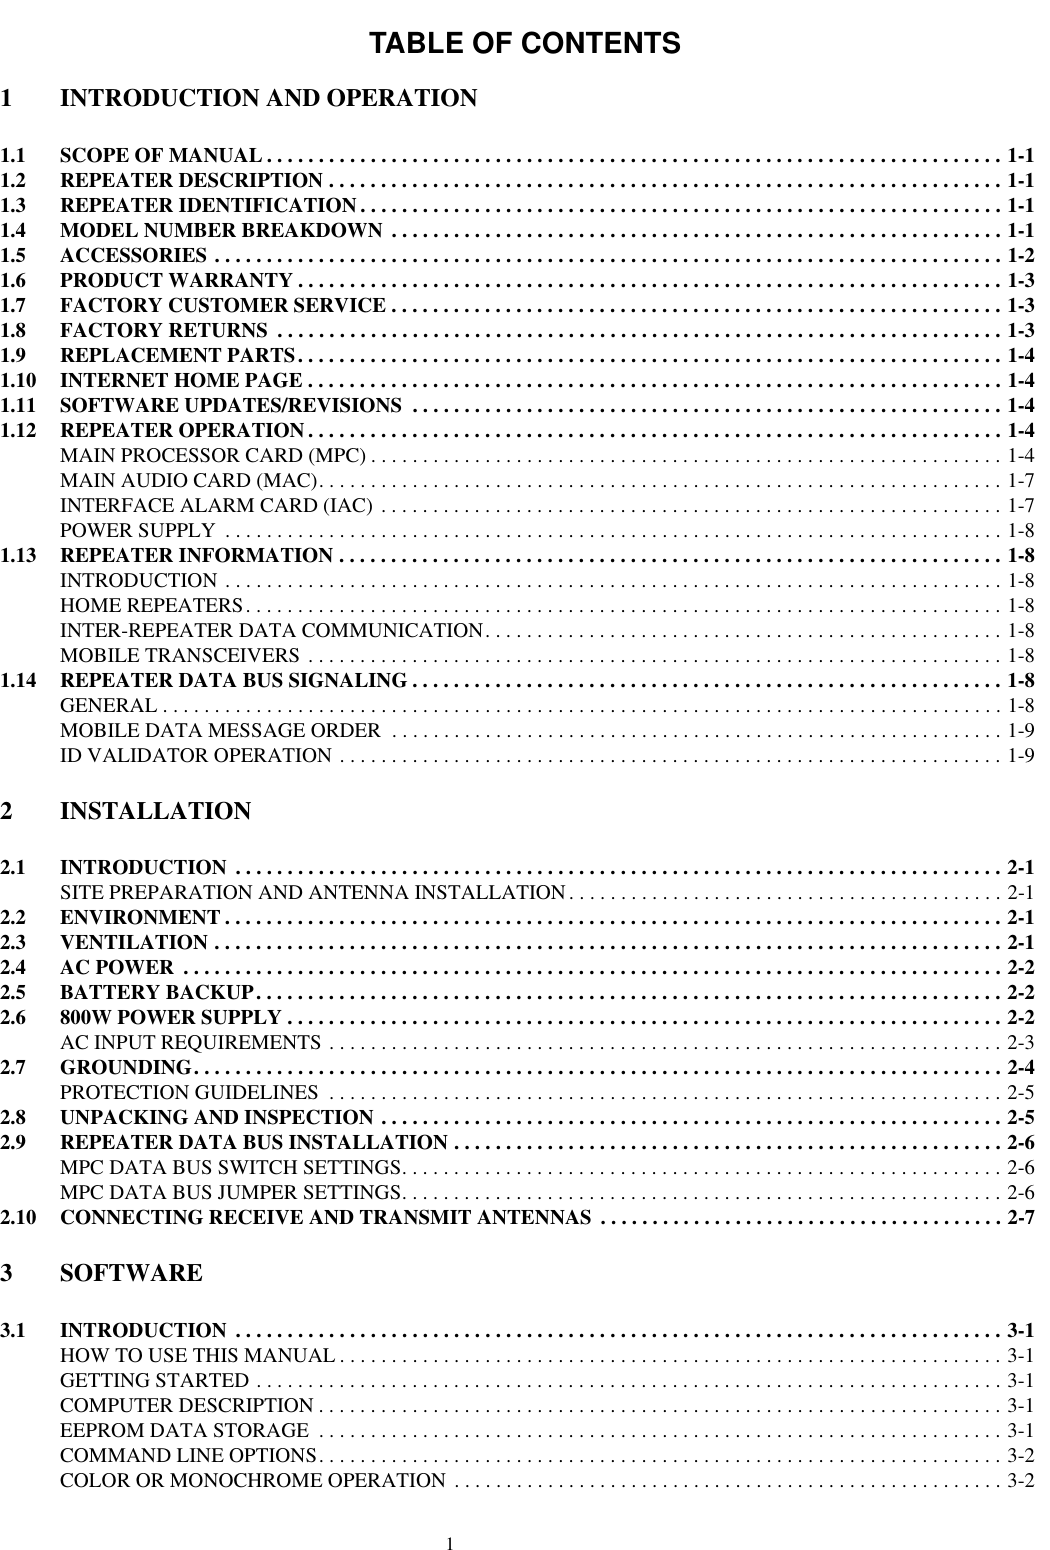 TABLE OF CONTENTS11 INTRODUCTION AND OPERATION1.1 SCOPE OF MANUAL . . . . . . . . . . . . . . . . . . . . . . . . . . . . . . . . . . . . . . . . . . . . . . . . . . . . . . . . . . . . . . . . . . . . . . . 1-11.2 REPEATER DESCRIPTION . . . . . . . . . . . . . . . . . . . . . . . . . . . . . . . . . . . . . . . . . . . . . . . . . . . . . . . . . . . . . . . . . 1-11.3 REPEATER IDENTIFICATION . . . . . . . . . . . . . . . . . . . . . . . . . . . . . . . . . . . . . . . . . . . . . . . . . . . . . . . . . . . . . . 1-11.4 MODEL NUMBER BREAKDOWN  . . . . . . . . . . . . . . . . . . . . . . . . . . . . . . . . . . . . . . . . . . . . . . . . . . . . . . . . . . . 1-11.5 ACCESSORIES . . . . . . . . . . . . . . . . . . . . . . . . . . . . . . . . . . . . . . . . . . . . . . . . . . . . . . . . . . . . . . . . . . . . . . . . . . . . 1-21.6 PRODUCT WARRANTY . . . . . . . . . . . . . . . . . . . . . . . . . . . . . . . . . . . . . . . . . . . . . . . . . . . . . . . . . . . . . . . . . . . . 1-31.7 FACTORY CUSTOMER SERVICE . . . . . . . . . . . . . . . . . . . . . . . . . . . . . . . . . . . . . . . . . . . . . . . . . . . . . . . . . . . 1-31.8 FACTORY RETURNS  . . . . . . . . . . . . . . . . . . . . . . . . . . . . . . . . . . . . . . . . . . . . . . . . . . . . . . . . . . . . . . . . . . . . . . 1-31.9 REPLACEMENT PARTS. . . . . . . . . . . . . . . . . . . . . . . . . . . . . . . . . . . . . . . . . . . . . . . . . . . . . . . . . . . . . . . . . . . . 1-41.10 INTERNET HOME PAGE . . . . . . . . . . . . . . . . . . . . . . . . . . . . . . . . . . . . . . . . . . . . . . . . . . . . . . . . . . . . . . . . . . . 1-41.11 SOFTWARE UPDATES/REVISIONS  . . . . . . . . . . . . . . . . . . . . . . . . . . . . . . . . . . . . . . . . . . . . . . . . . . . . . . . . . 1-41.12 REPEATER OPERATION . . . . . . . . . . . . . . . . . . . . . . . . . . . . . . . . . . . . . . . . . . . . . . . . . . . . . . . . . . . . . . . . . . . 1-4MAIN PROCESSOR CARD (MPC) . . . . . . . . . . . . . . . . . . . . . . . . . . . . . . . . . . . . . . . . . . . . . . . . . . . . . . . . . . . . . 1-4MAIN AUDIO CARD (MAC). . . . . . . . . . . . . . . . . . . . . . . . . . . . . . . . . . . . . . . . . . . . . . . . . . . . . . . . . . . . . . . . . . 1-7INTERFACE ALARM CARD (IAC) . . . . . . . . . . . . . . . . . . . . . . . . . . . . . . . . . . . . . . . . . . . . . . . . . . . . . . . . . . . . 1-7POWER SUPPLY  . . . . . . . . . . . . . . . . . . . . . . . . . . . . . . . . . . . . . . . . . . . . . . . . . . . . . . . . . . . . . . . . . . . . . . . . . . . 1-81.13 REPEATER INFORMATION . . . . . . . . . . . . . . . . . . . . . . . . . . . . . . . . . . . . . . . . . . . . . . . . . . . . . . . . . . . . . . . . 1-8INTRODUCTION . . . . . . . . . . . . . . . . . . . . . . . . . . . . . . . . . . . . . . . . . . . . . . . . . . . . . . . . . . . . . . . . . . . . . . . . . . . 1-8HOME REPEATERS. . . . . . . . . . . . . . . . . . . . . . . . . . . . . . . . . . . . . . . . . . . . . . . . . . . . . . . . . . . . . . . . . . . . . . . . . 1-8INTER-REPEATER DATA COMMUNICATION. . . . . . . . . . . . . . . . . . . . . . . . . . . . . . . . . . . . . . . . . . . . . . . . . . 1-8MOBILE TRANSCEIVERS . . . . . . . . . . . . . . . . . . . . . . . . . . . . . . . . . . . . . . . . . . . . . . . . . . . . . . . . . . . . . . . . . . . 1-81.14 REPEATER DATA BUS SIGNALING . . . . . . . . . . . . . . . . . . . . . . . . . . . . . . . . . . . . . . . . . . . . . . . . . . . . . . . . . 1-8GENERAL . . . . . . . . . . . . . . . . . . . . . . . . . . . . . . . . . . . . . . . . . . . . . . . . . . . . . . . . . . . . . . . . . . . . . . . . . . . . . . . . . 1-8MOBILE DATA MESSAGE ORDER  . . . . . . . . . . . . . . . . . . . . . . . . . . . . . . . . . . . . . . . . . . . . . . . . . . . . . . . . . . . 1-9ID VALIDATOR OPERATION . . . . . . . . . . . . . . . . . . . . . . . . . . . . . . . . . . . . . . . . . . . . . . . . . . . . . . . . . . . . . . . . 1-92 INSTALLATION2.1 INTRODUCTION  . . . . . . . . . . . . . . . . . . . . . . . . . . . . . . . . . . . . . . . . . . . . . . . . . . . . . . . . . . . . . . . . . . . . . . . . . . 2-1SITE PREPARATION AND ANTENNA INSTALLATION. . . . . . . . . . . . . . . . . . . . . . . . . . . . . . . . . . . . . . . . . . 2-12.2 ENVIRONMENT . . . . . . . . . . . . . . . . . . . . . . . . . . . . . . . . . . . . . . . . . . . . . . . . . . . . . . . . . . . . . . . . . . . . . . . . . . . 2-12.3 VENTILATION . . . . . . . . . . . . . . . . . . . . . . . . . . . . . . . . . . . . . . . . . . . . . . . . . . . . . . . . . . . . . . . . . . . . . . . . . . . . 2-12.4 AC POWER  . . . . . . . . . . . . . . . . . . . . . . . . . . . . . . . . . . . . . . . . . . . . . . . . . . . . . . . . . . . . . . . . . . . . . . . . . . . . . . . 2-22.5 BATTERY BACKUP. . . . . . . . . . . . . . . . . . . . . . . . . . . . . . . . . . . . . . . . . . . . . . . . . . . . . . . . . . . . . . . . . . . . . . . . 2-22.6 800W POWER SUPPLY . . . . . . . . . . . . . . . . . . . . . . . . . . . . . . . . . . . . . . . . . . . . . . . . . . . . . . . . . . . . . . . . . . . . . 2-2AC INPUT REQUIREMENTS . . . . . . . . . . . . . . . . . . . . . . . . . . . . . . . . . . . . . . . . . . . . . . . . . . . . . . . . . . . . . . . . . 2-32.7 GROUNDING. . . . . . . . . . . . . . . . . . . . . . . . . . . . . . . . . . . . . . . . . . . . . . . . . . . . . . . . . . . . . . . . . . . . . . . . . . . . . . 2-4PROTECTION GUIDELINES  . . . . . . . . . . . . . . . . . . . . . . . . . . . . . . . . . . . . . . . . . . . . . . . . . . . . . . . . . . . . . . . . . 2-52.8 UNPACKING AND INSPECTION . . . . . . . . . . . . . . . . . . . . . . . . . . . . . . . . . . . . . . . . . . . . . . . . . . . . . . . . . . . . 2-52.9 REPEATER DATA BUS INSTALLATION . . . . . . . . . . . . . . . . . . . . . . . . . . . . . . . . . . . . . . . . . . . . . . . . . . . . . 2-6MPC DATA BUS SWITCH SETTINGS. . . . . . . . . . . . . . . . . . . . . . . . . . . . . . . . . . . . . . . . . . . . . . . . . . . . . . . . . . 2-6MPC DATA BUS JUMPER SETTINGS. . . . . . . . . . . . . . . . . . . . . . . . . . . . . . . . . . . . . . . . . . . . . . . . . . . . . . . . . . 2-62.10 CONNECTING RECEIVE AND TRANSMIT ANTENNAS  . . . . . . . . . . . . . . . . . . . . . . . . . . . . . . . . . . . . . . . 2-73 SOFTWARE3.1 INTRODUCTION  . . . . . . . . . . . . . . . . . . . . . . . . . . . . . . . . . . . . . . . . . . . . . . . . . . . . . . . . . . . . . . . . . . . . . . . . . . 3-1HOW TO USE THIS MANUAL . . . . . . . . . . . . . . . . . . . . . . . . . . . . . . . . . . . . . . . . . . . . . . . . . . . . . . . . . . . . . . . . 3-1GETTING STARTED . . . . . . . . . . . . . . . . . . . . . . . . . . . . . . . . . . . . . . . . . . . . . . . . . . . . . . . . . . . . . . . . . . . . . . . . 3-1COMPUTER DESCRIPTION . . . . . . . . . . . . . . . . . . . . . . . . . . . . . . . . . . . . . . . . . . . . . . . . . . . . . . . . . . . . . . . . . . 3-1EEPROM DATA STORAGE  . . . . . . . . . . . . . . . . . . . . . . . . . . . . . . . . . . . . . . . . . . . . . . . . . . . . . . . . . . . . . . . . . . 3-1COMMAND LINE OPTIONS. . . . . . . . . . . . . . . . . . . . . . . . . . . . . . . . . . . . . . . . . . . . . . . . . . . . . . . . . . . . . . . . . . 3-2COLOR OR MONOCHROME OPERATION . . . . . . . . . . . . . . . . . . . . . . . . . . . . . . . . . . . . . . . . . . . . . . . . . . . . . 3-2